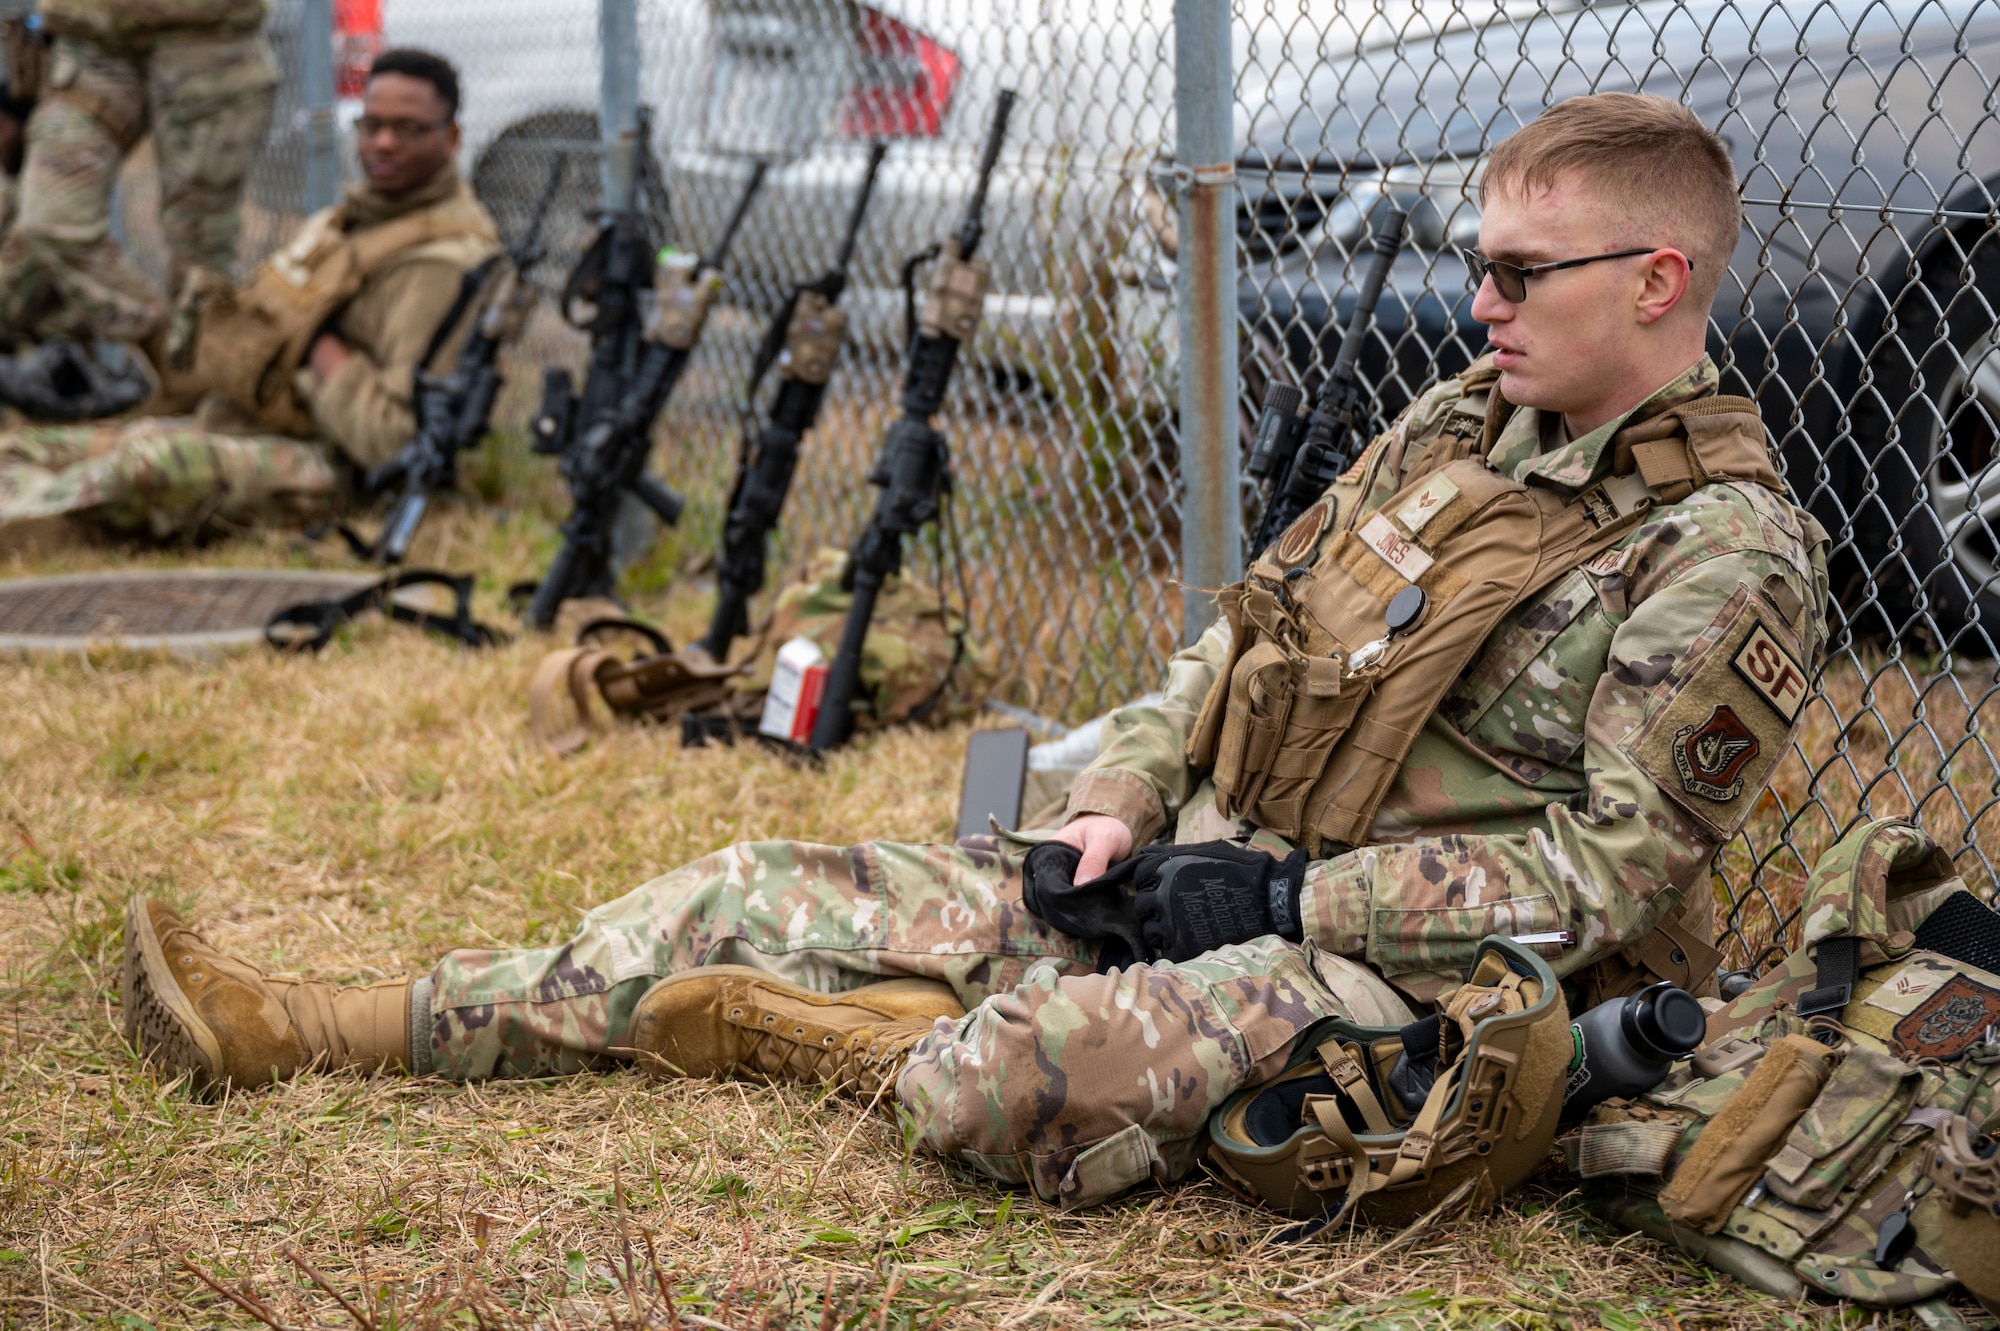 A Airman rest on a fence during a training.